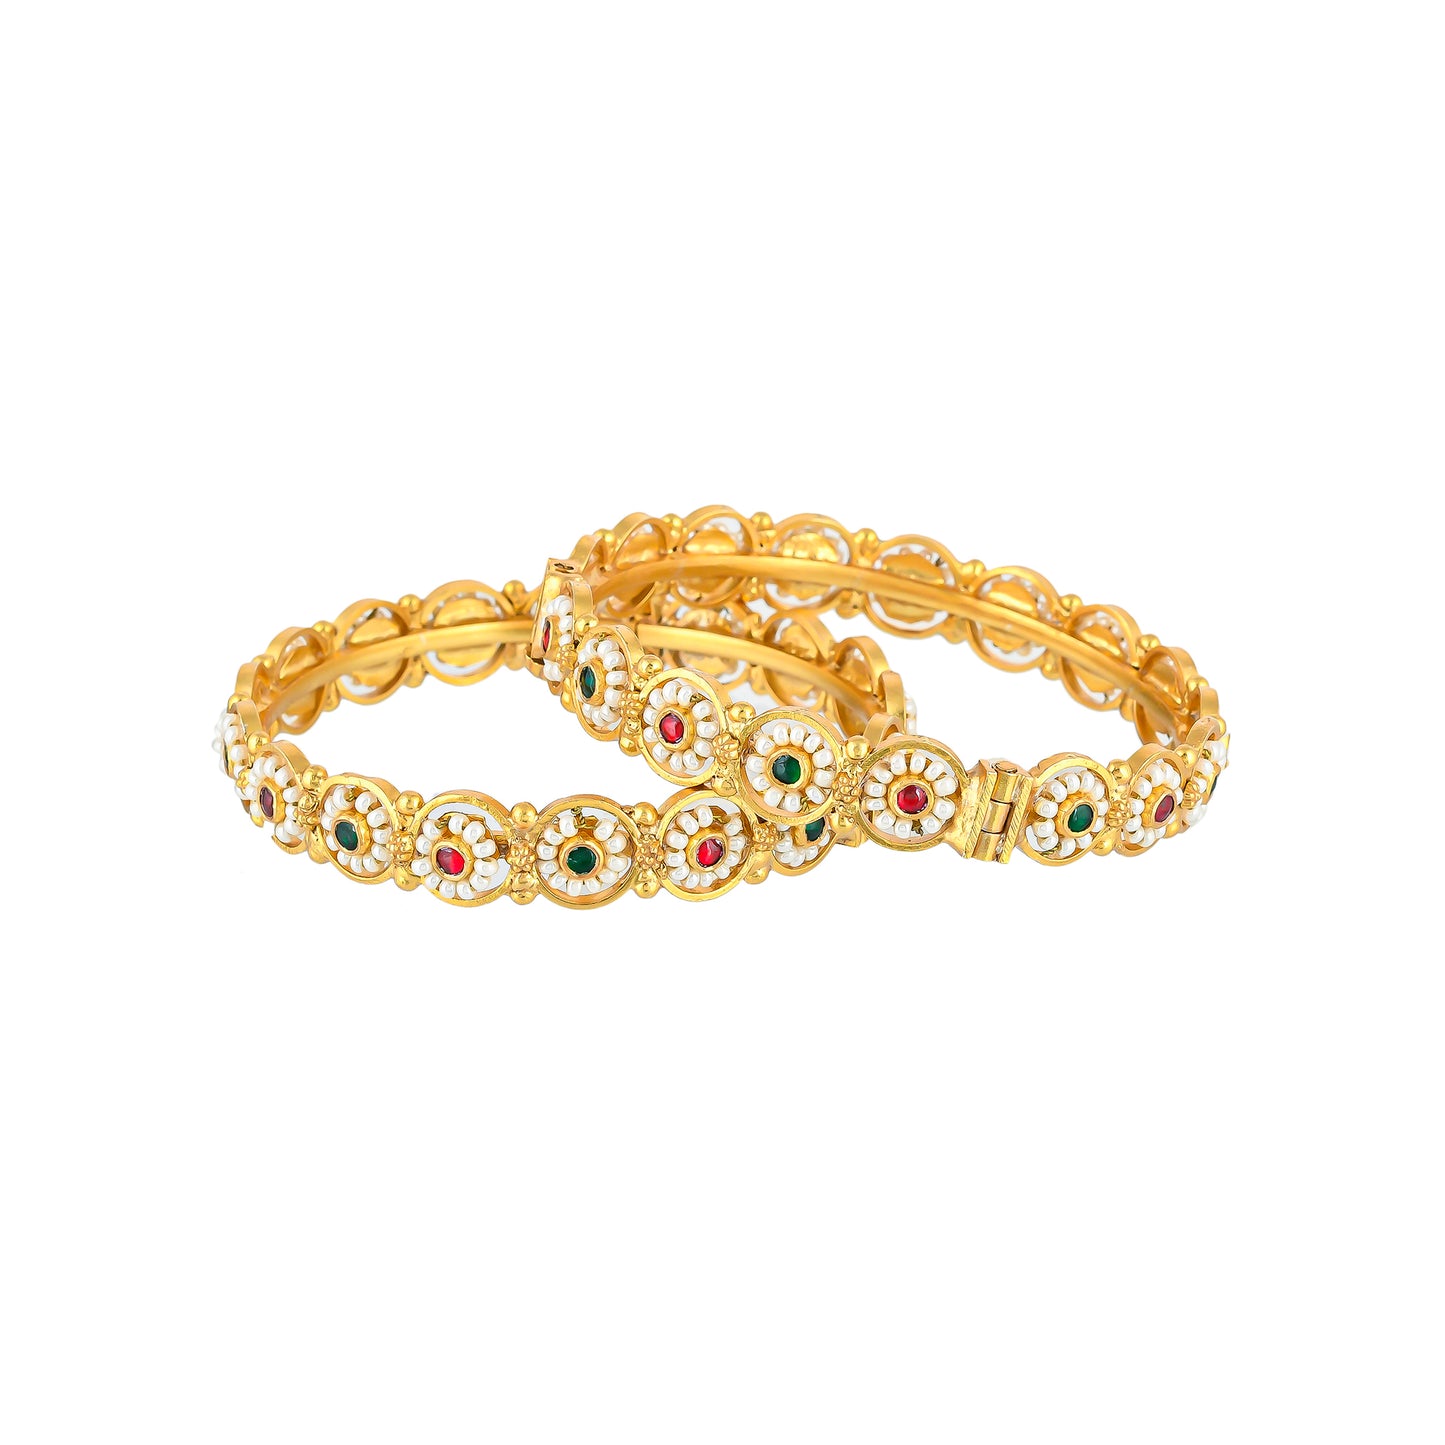 AANYA MULTISTONE
BEADED BEADS, GOLD PLATED SILVER, BANGLES